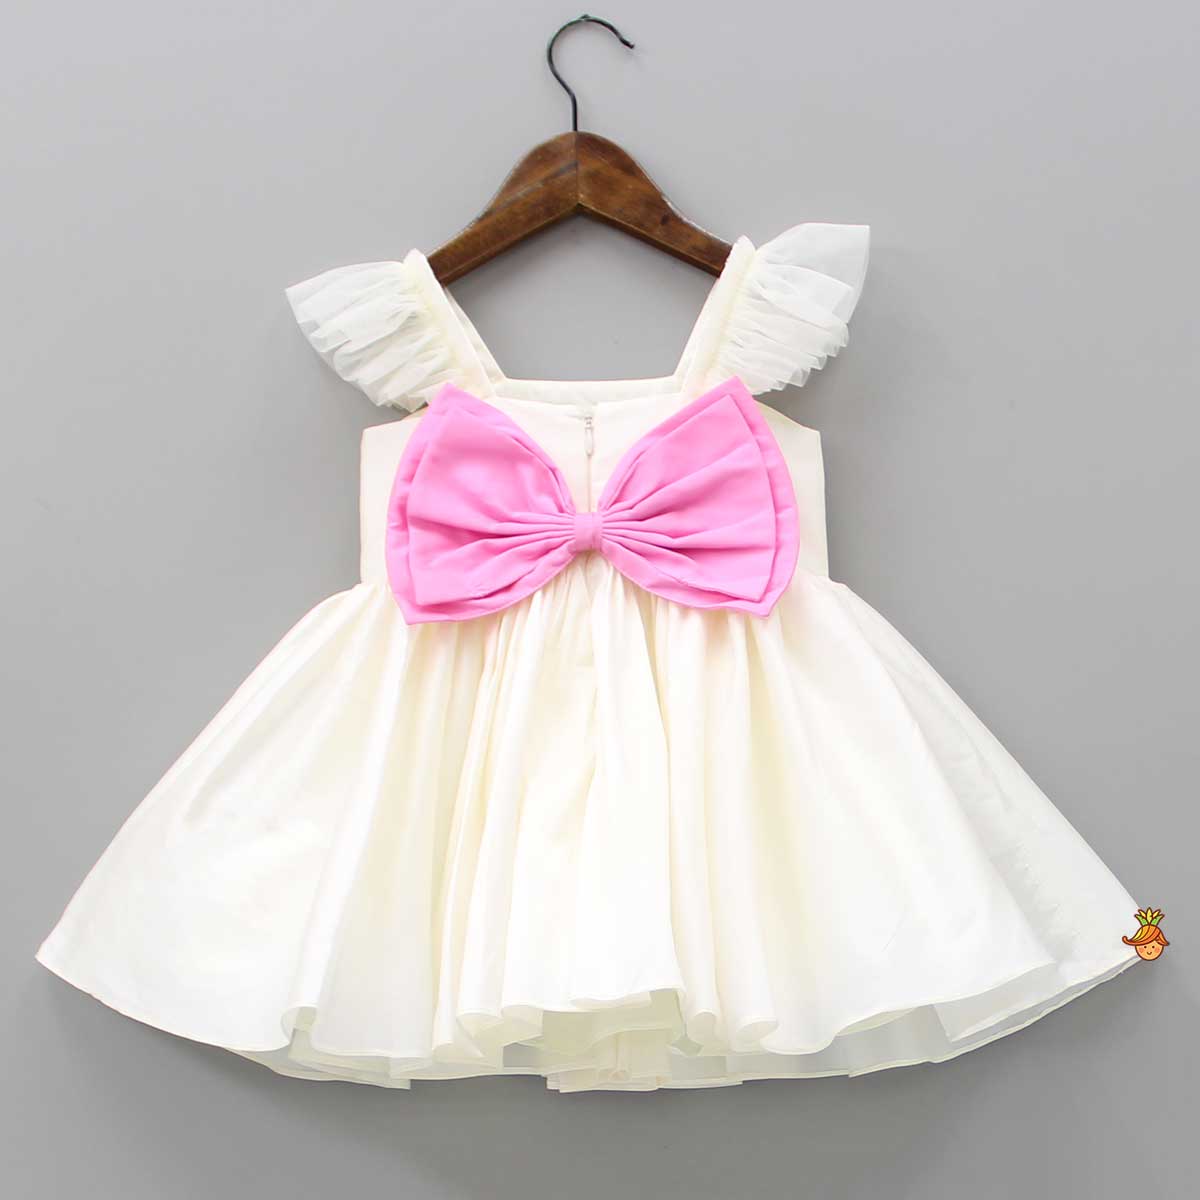 Off White Candies Embroidered Dress With Contrasting Pink Head Band